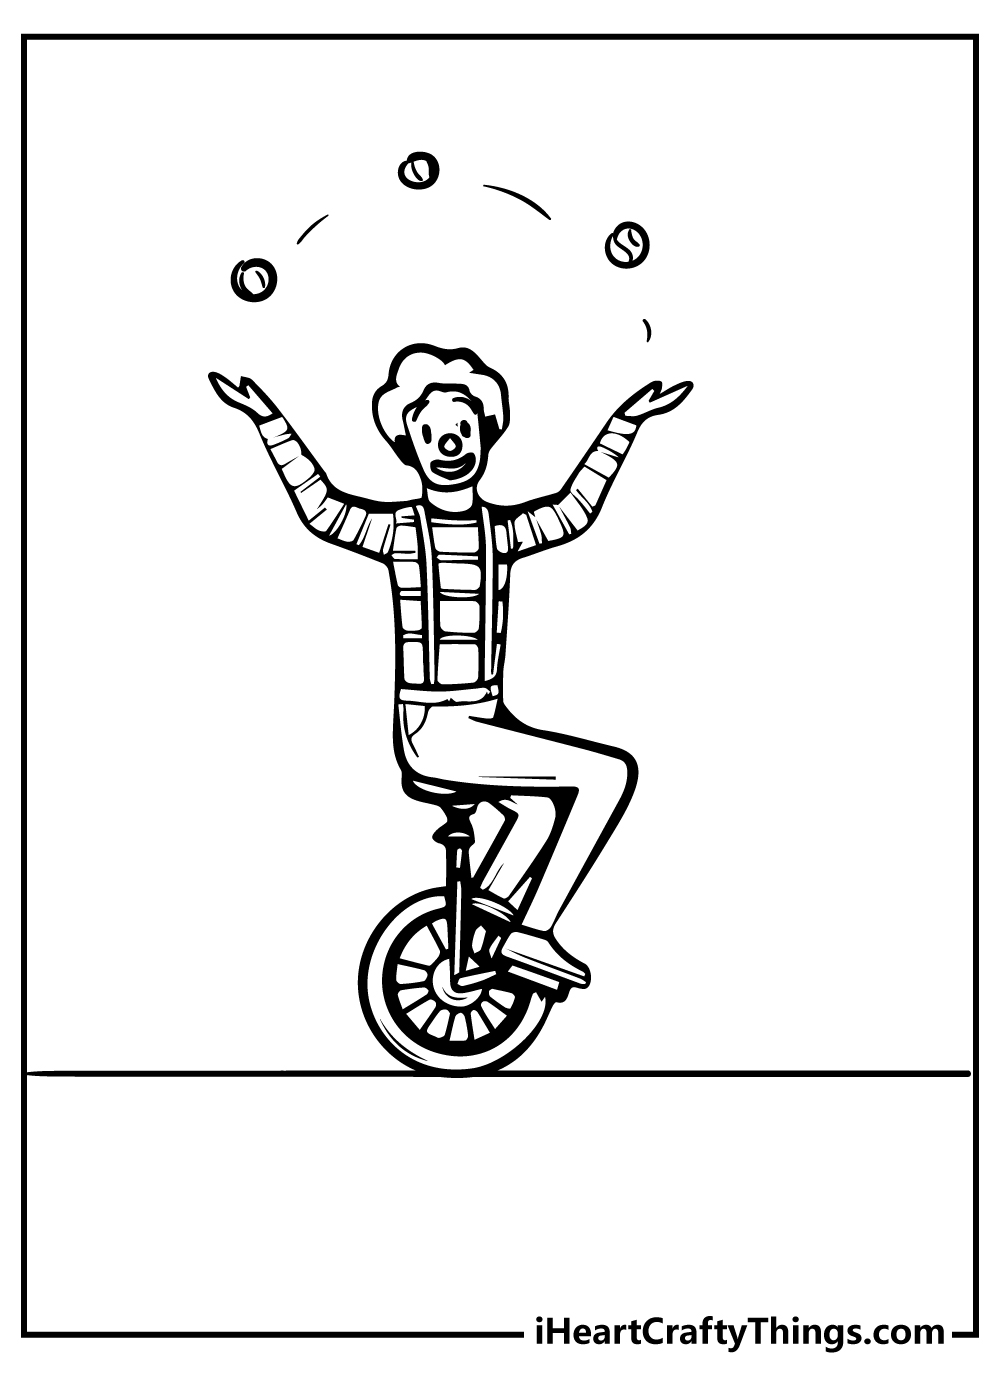 Circus Coloring Pages for adults free printable